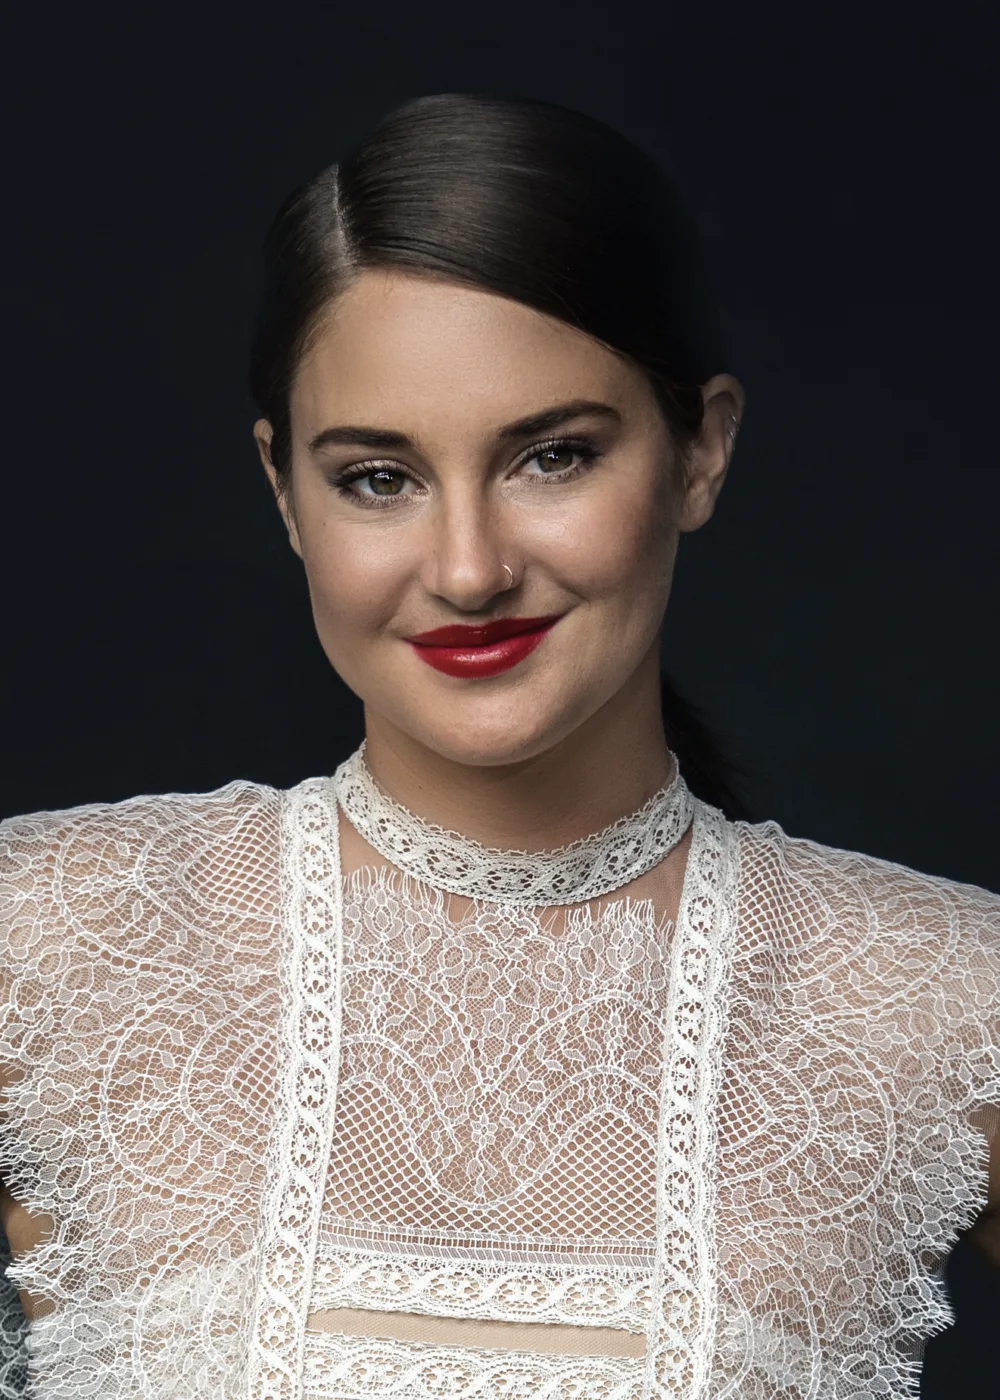 Shailene Woodley is an American actress known for her powerful performances in both film and television. She was born on November 15, 1991, in San Bernardino, California. Woodley started her career in acting at a young age, with her breakout role coming in the television series 